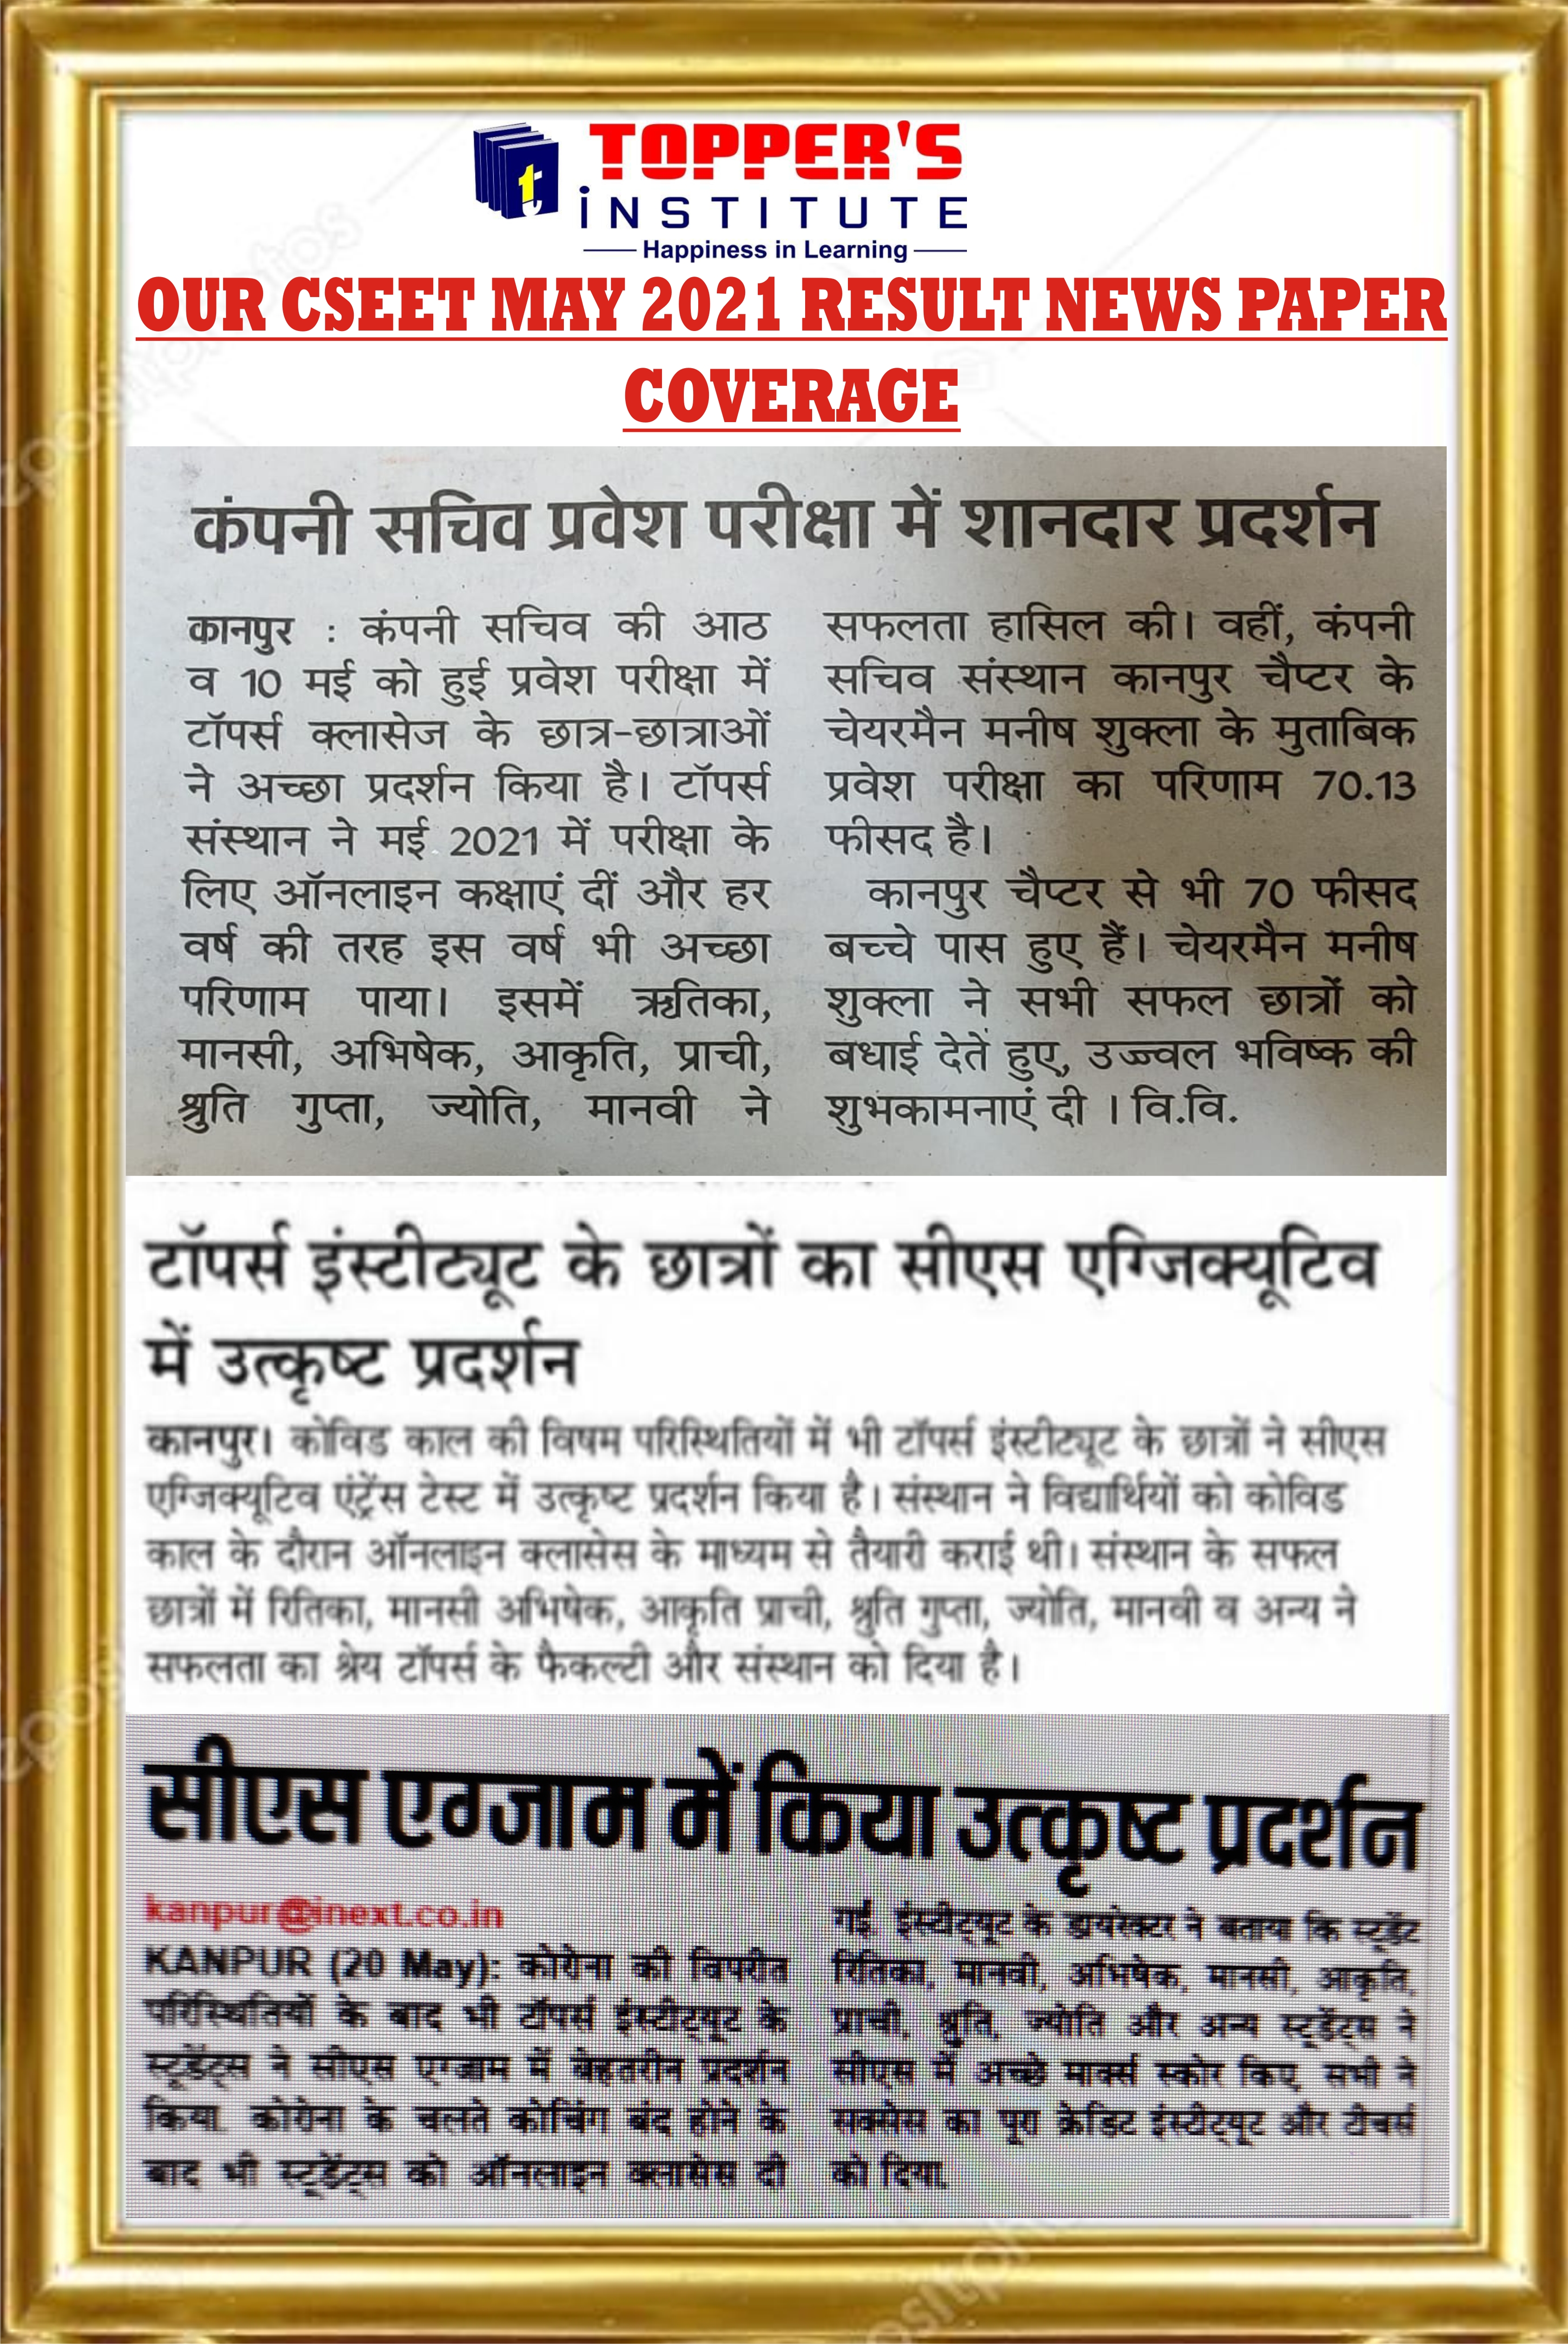 CSEET MAY 2021 NEWS HEADLINES ABOUT TOPPERS INSTITUTE KANPUR